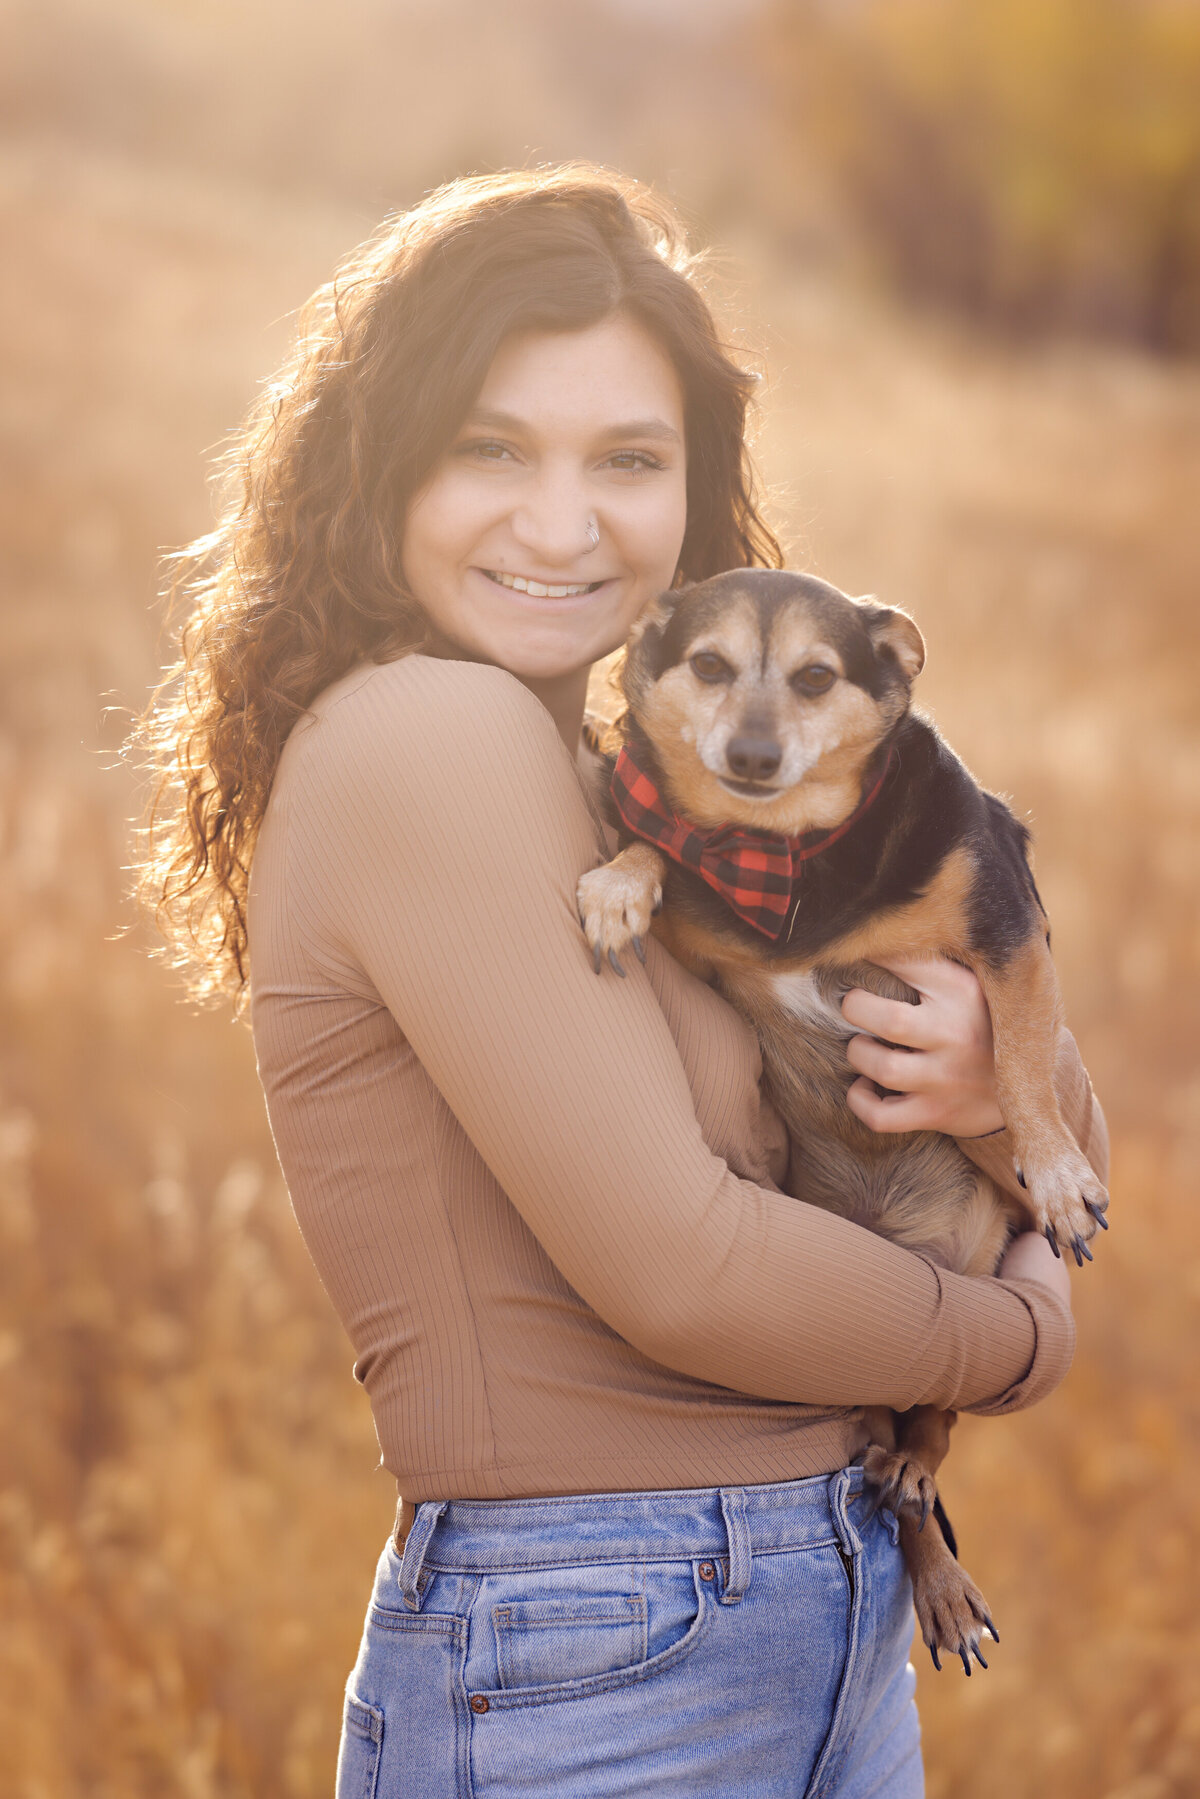 Yvonne-Min-Family-Photos-outside-natural-light-park-trees-sunset-photography-arvada-denver-thornton-broomfield-views-majestic-superior-dog-best-friend-daughter-hug-portraits-session-westminster-north-colorado-golden-canon-hair-camera-curly-62